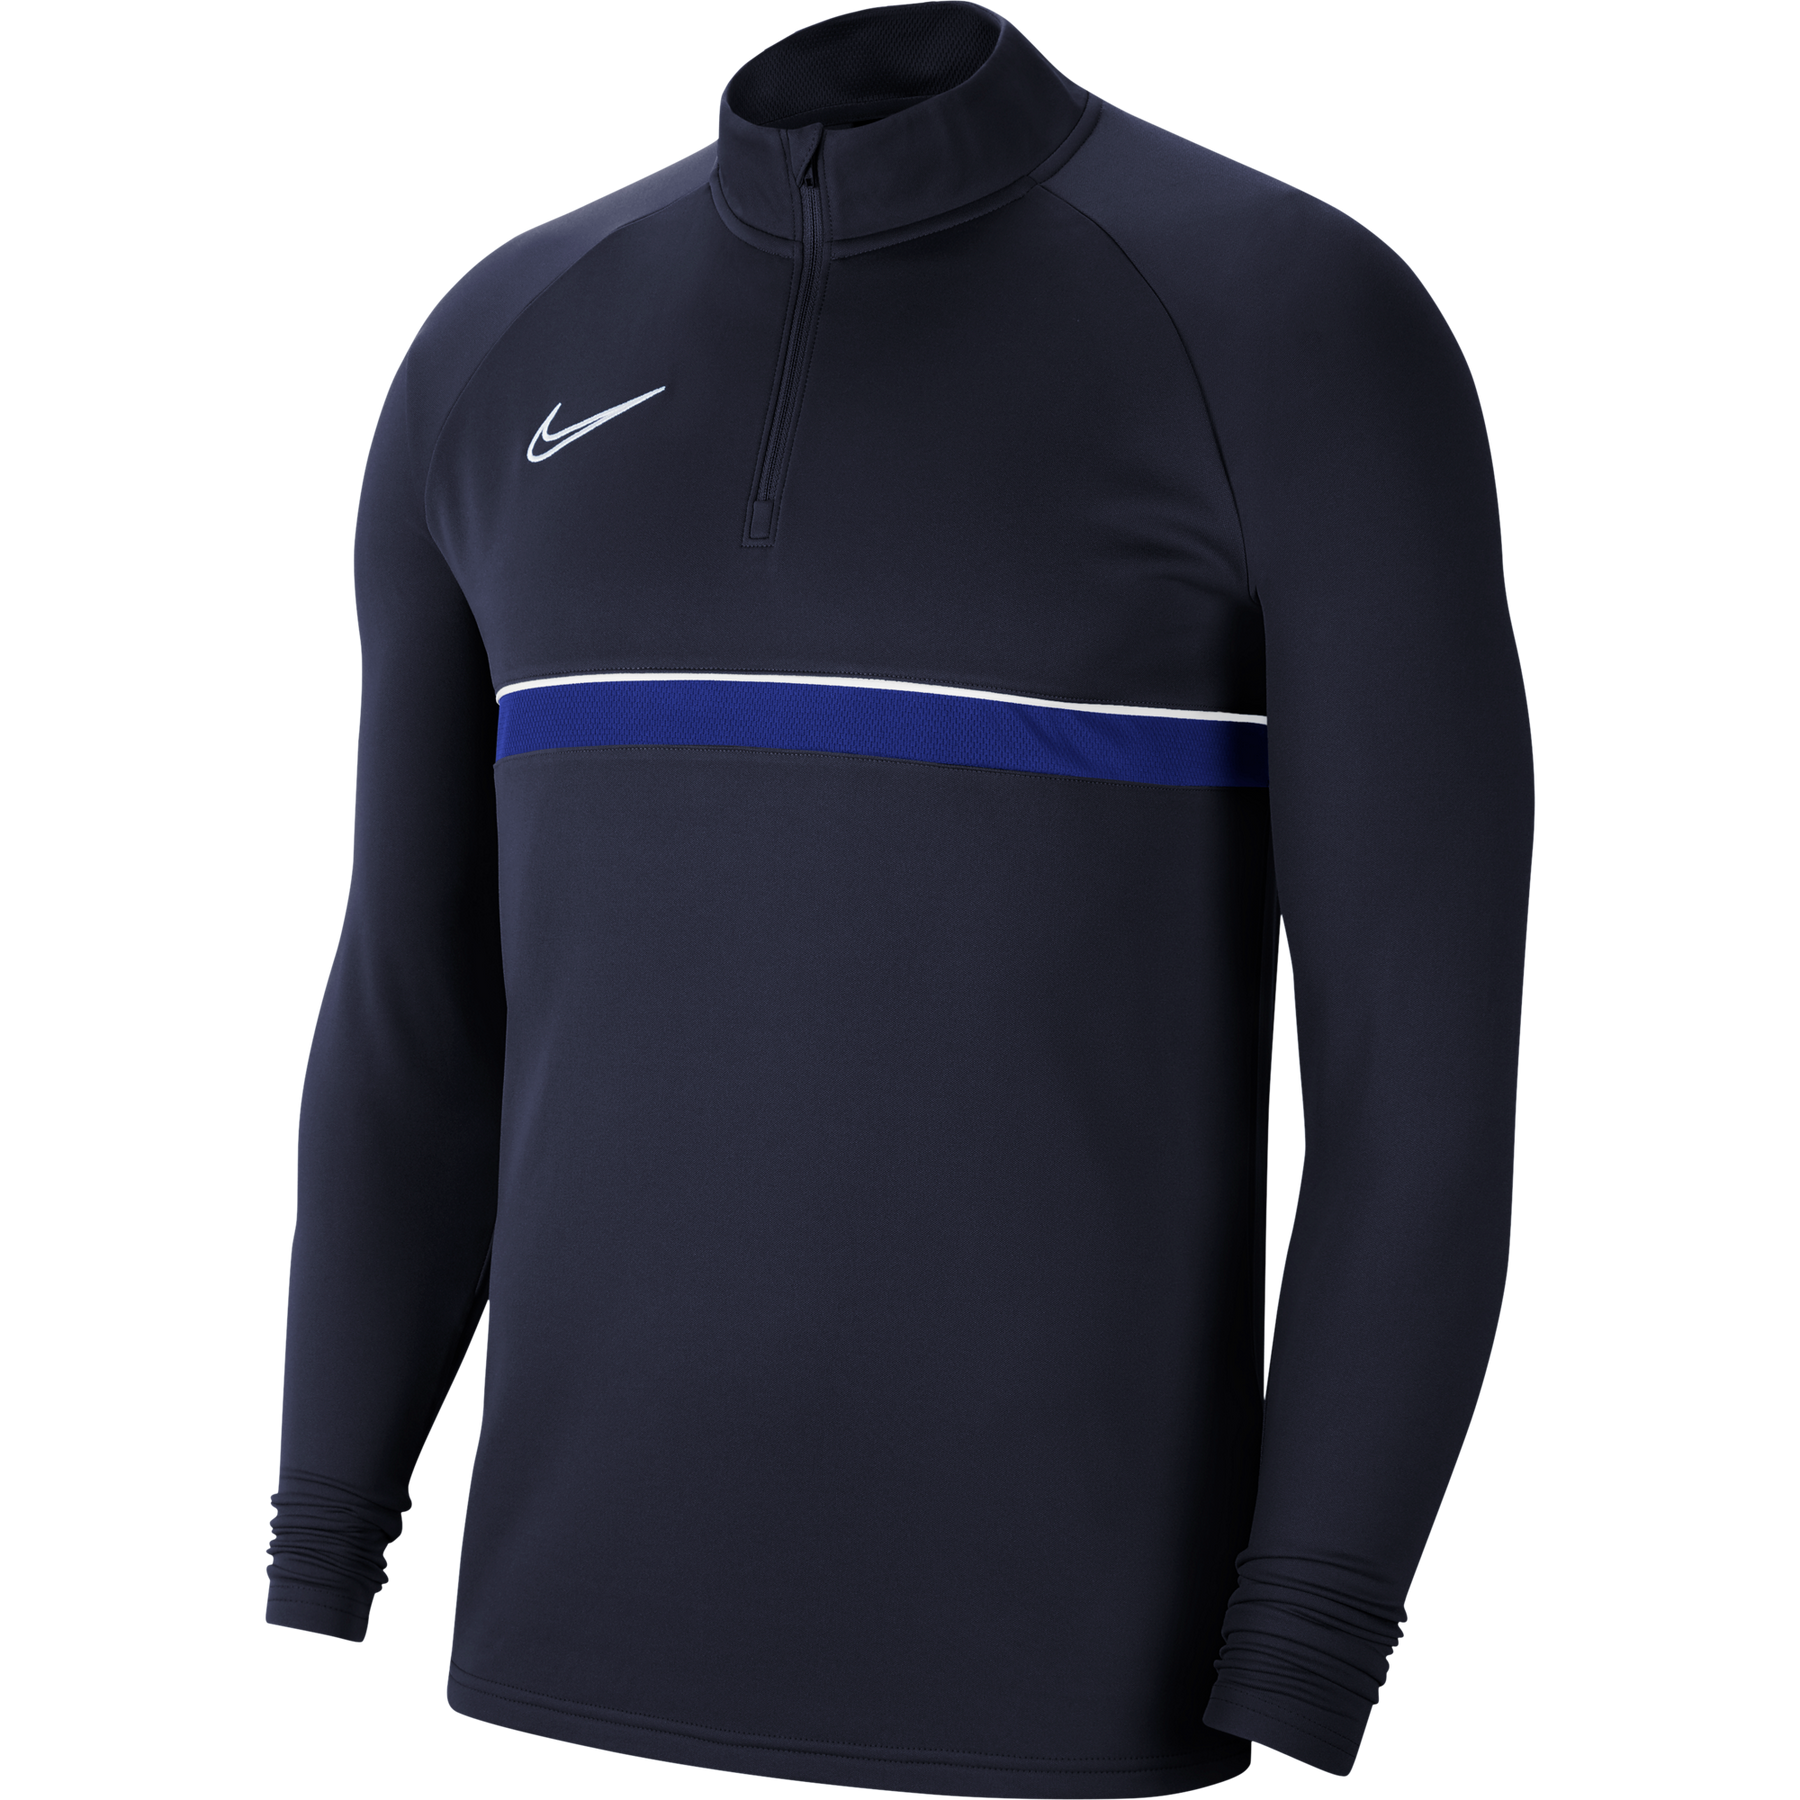 Nike Academy 21 Drill Top